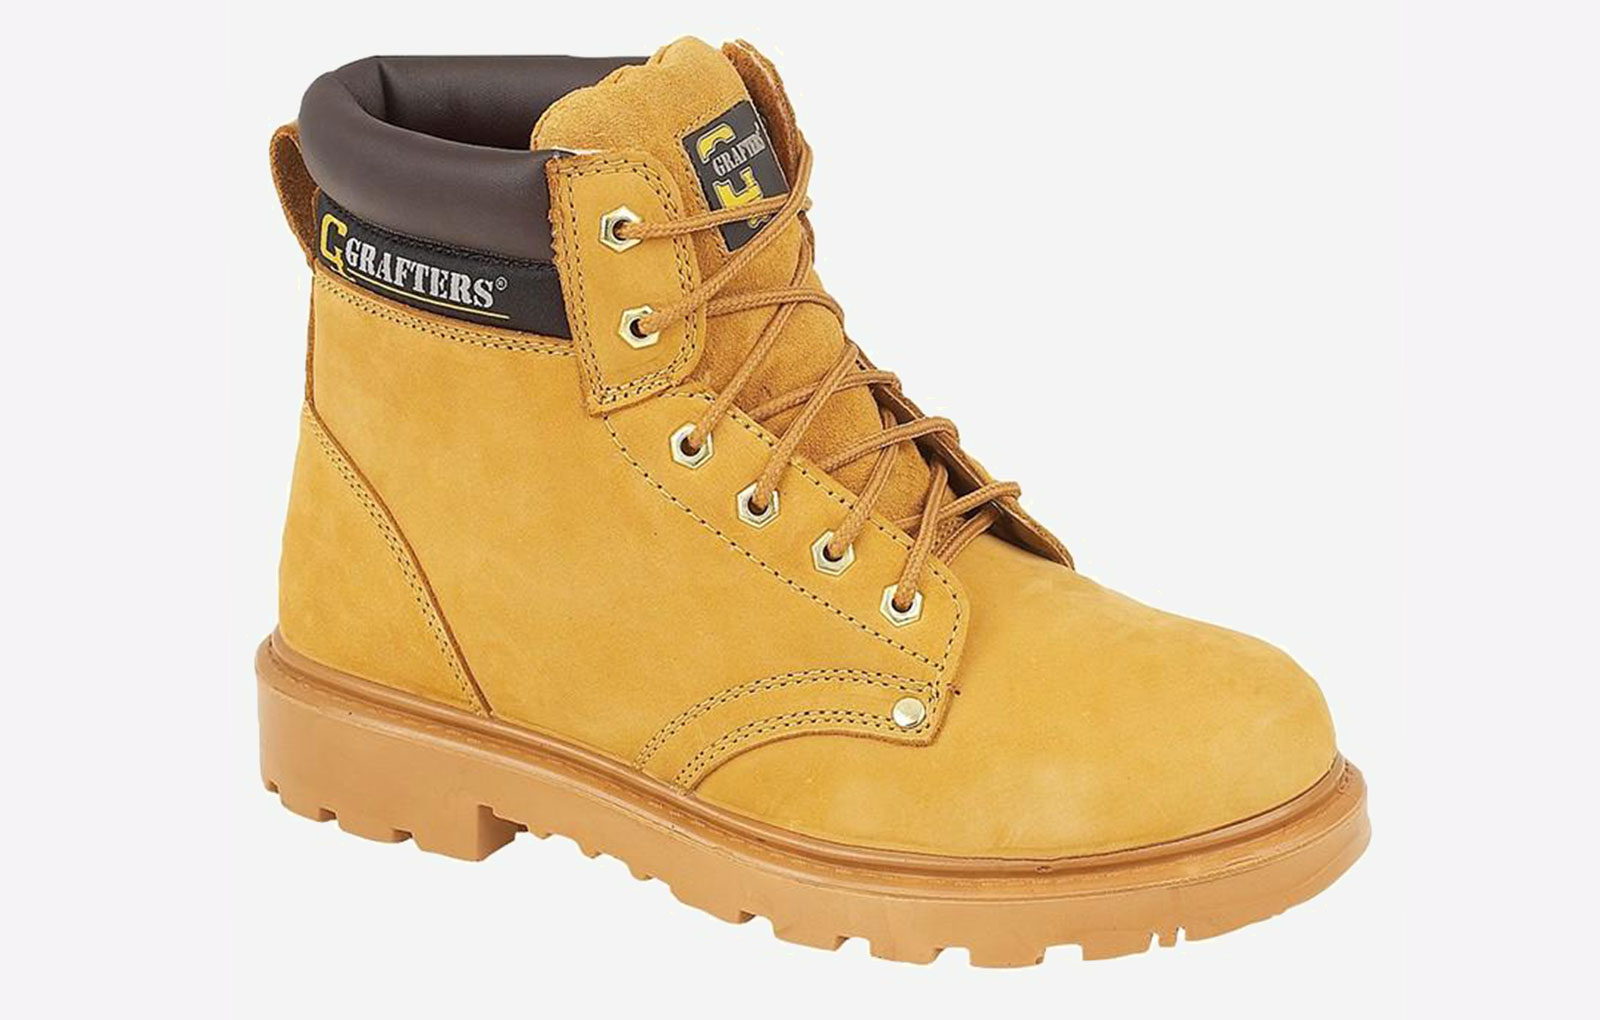 Grafters Apprentice Safety Boots Mens - GBD-1387